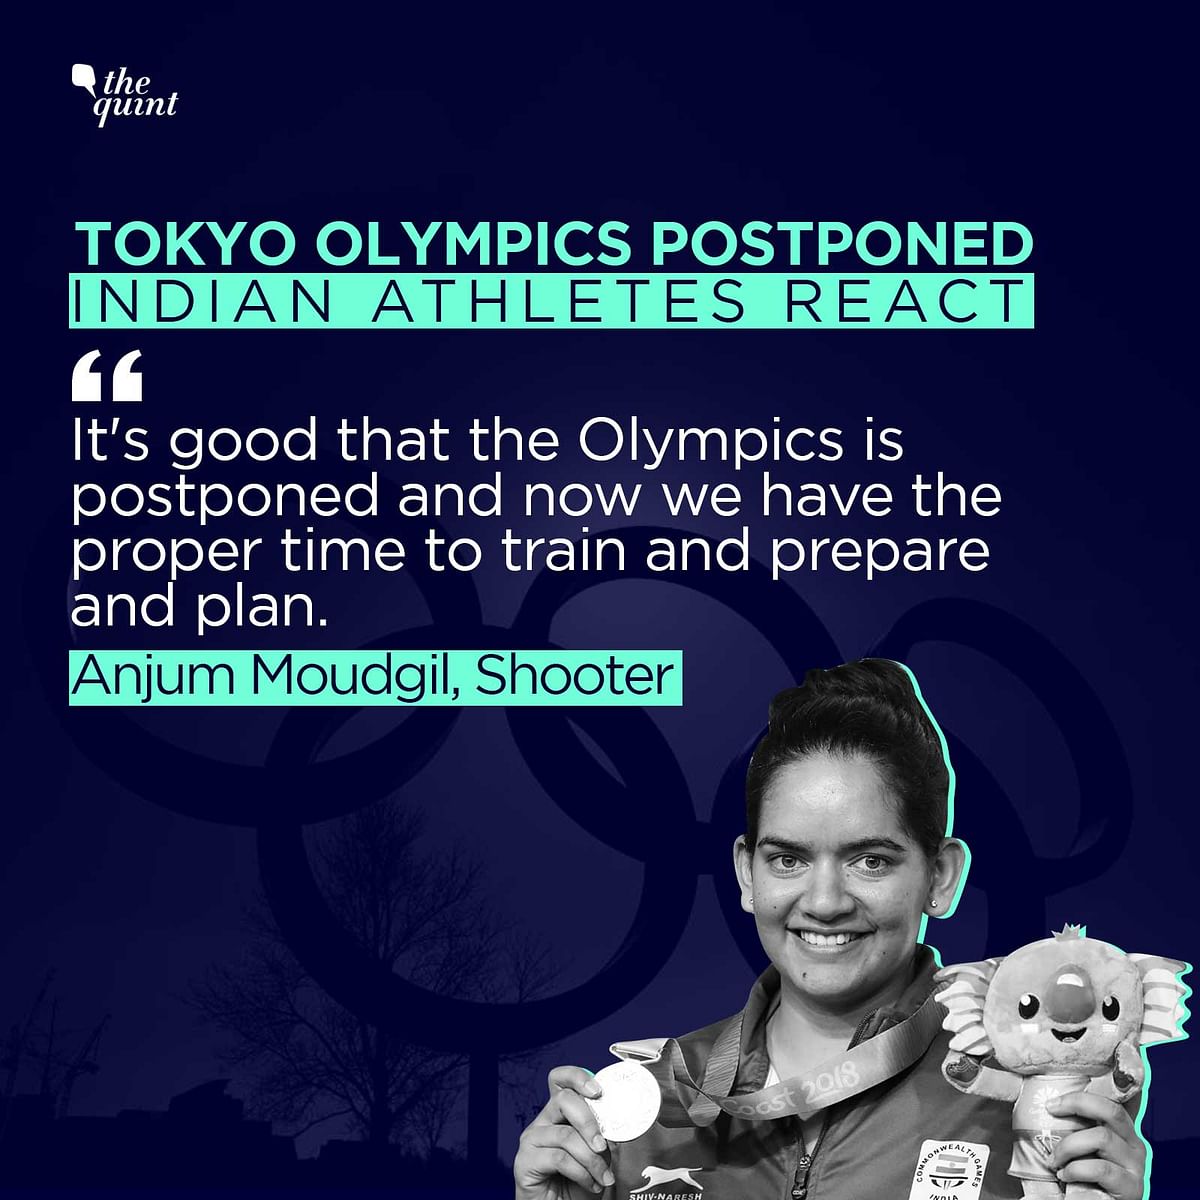 Tokyo 2020 Olympics, scheduled from 24 July to 9 August, was postponed to no later than summer of 2021 on 24 March.